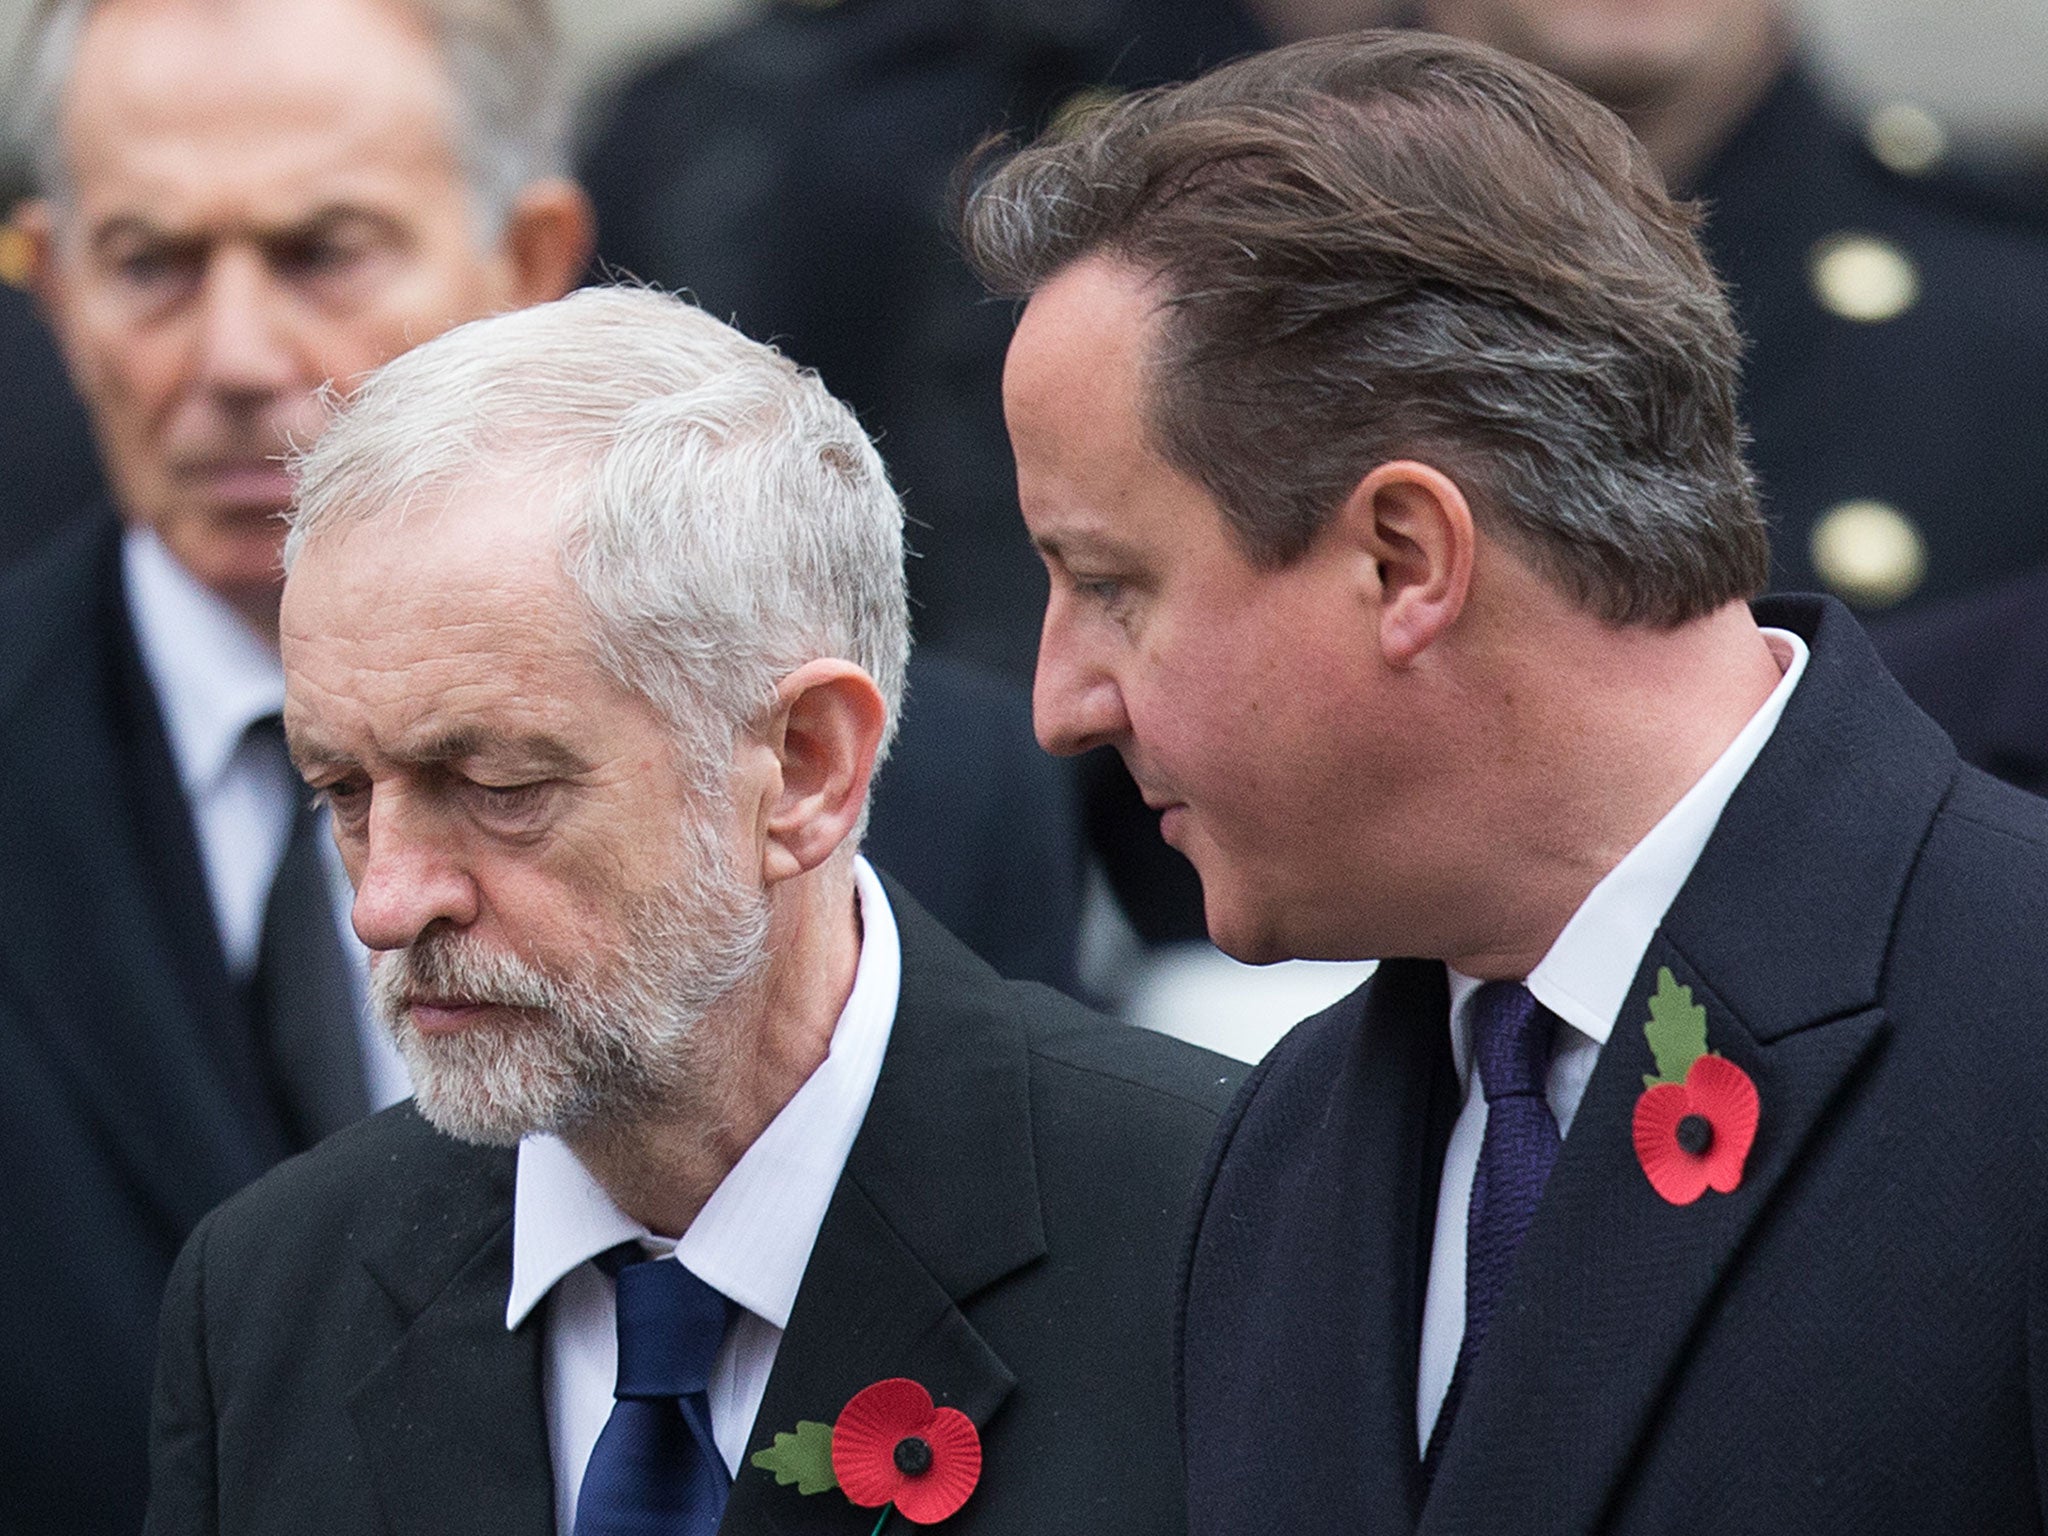 Labour leader Jeremy Corbyn and British Prime Minister David Cameron attend the annual Remembrance Sunday Service at the Cenotaph